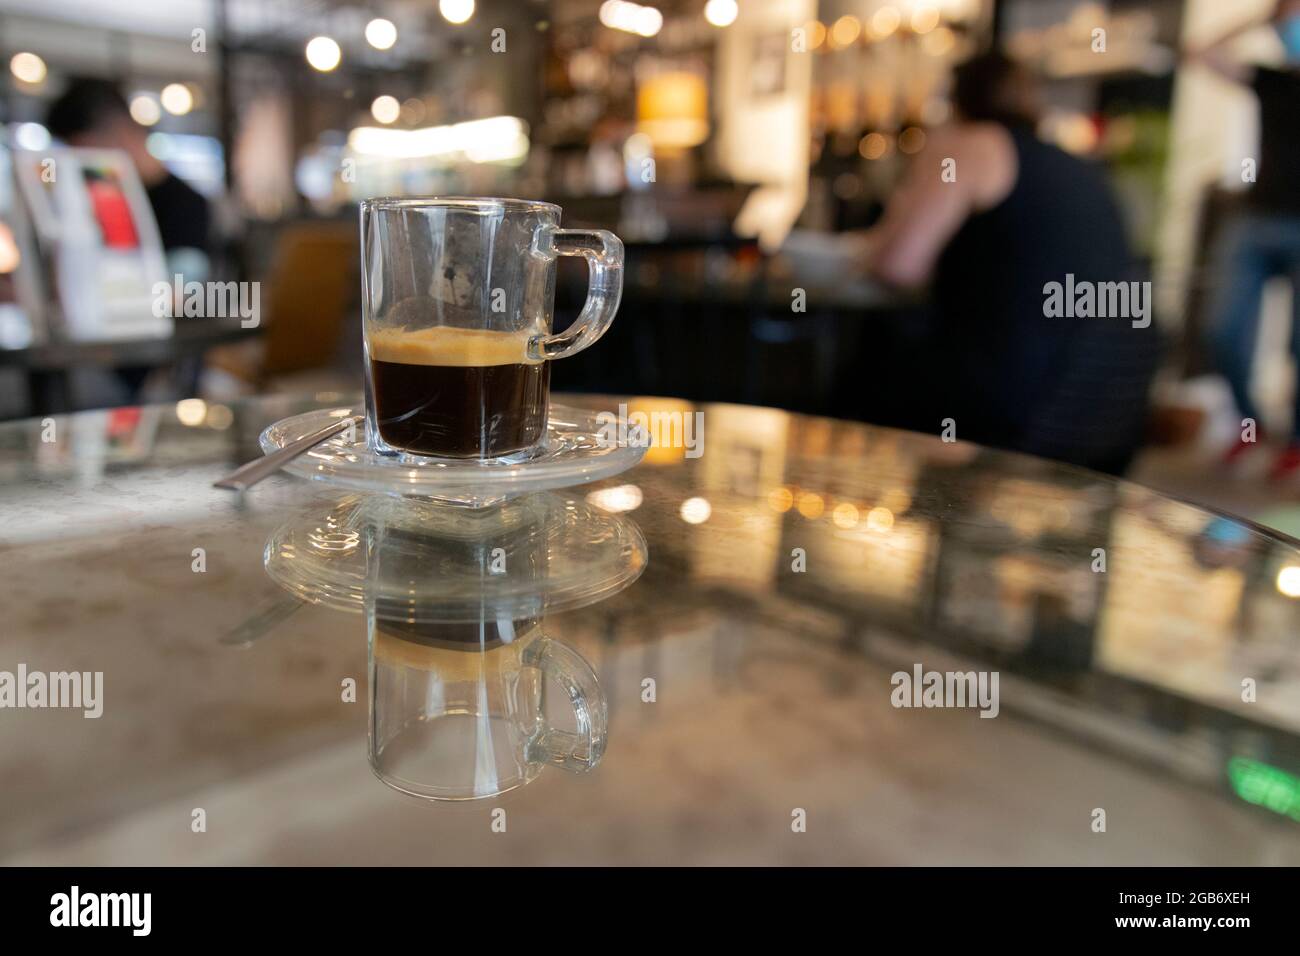 Close up landscape image of a glass cup of espresso with natural foam sitting on top of a mirror table in a posh cafe. Stock Photo